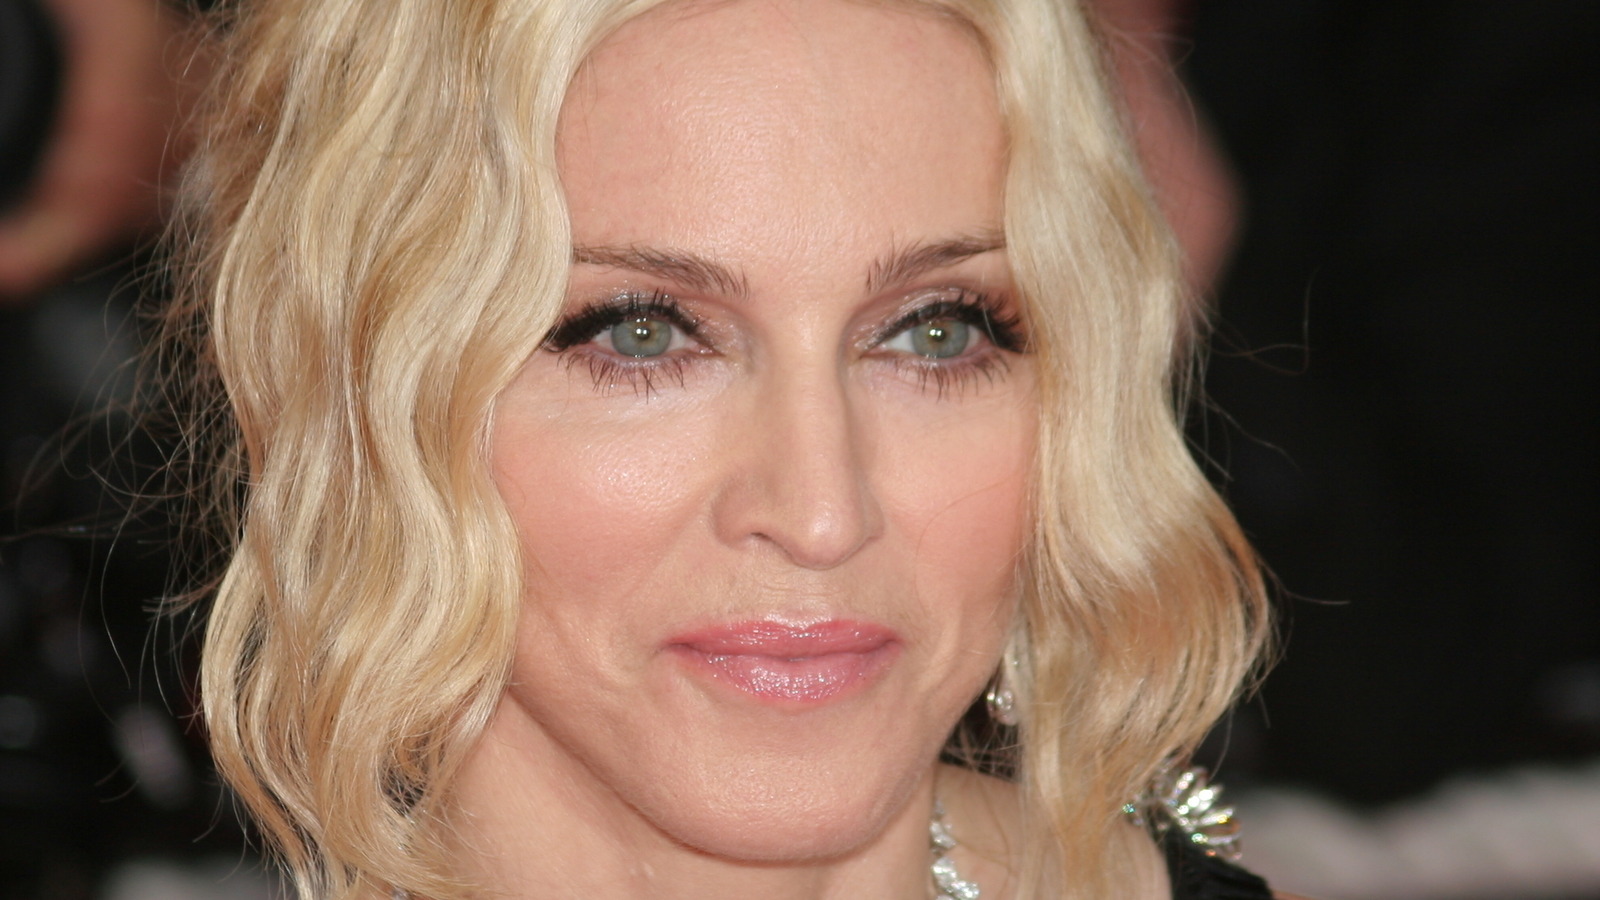 The Strange Phobia You Didn't Know Madonna Has